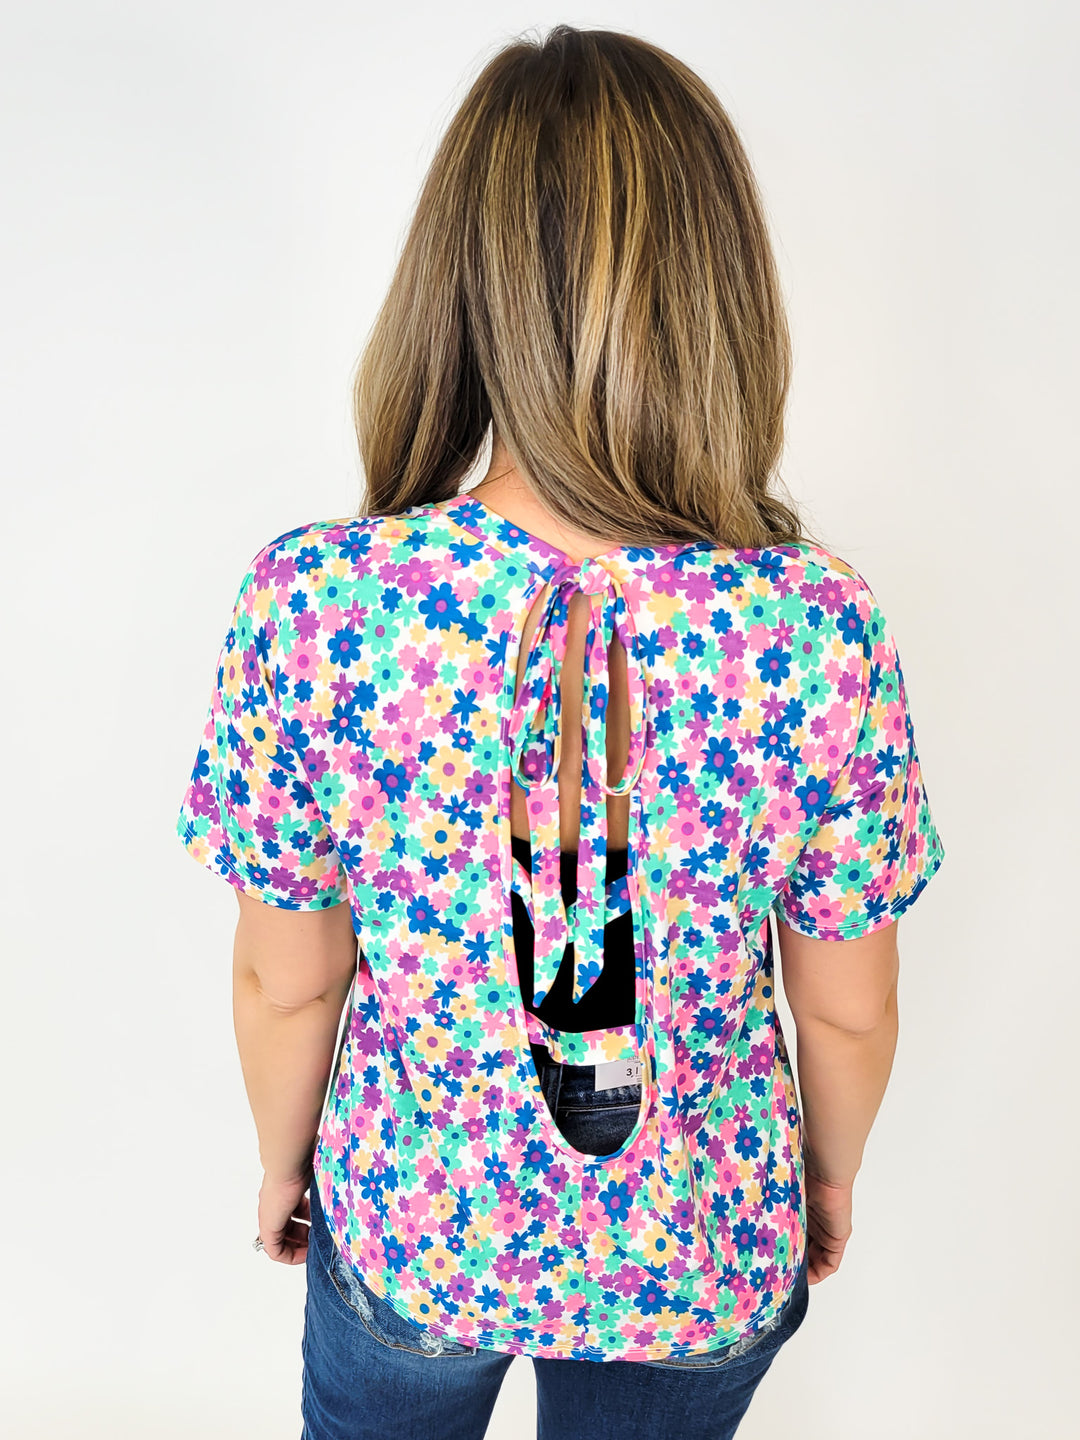 SHORT SLEEVE ROUND NECK FLORAL PRINTED TOP - NEON PINK/ROYAL BLUE